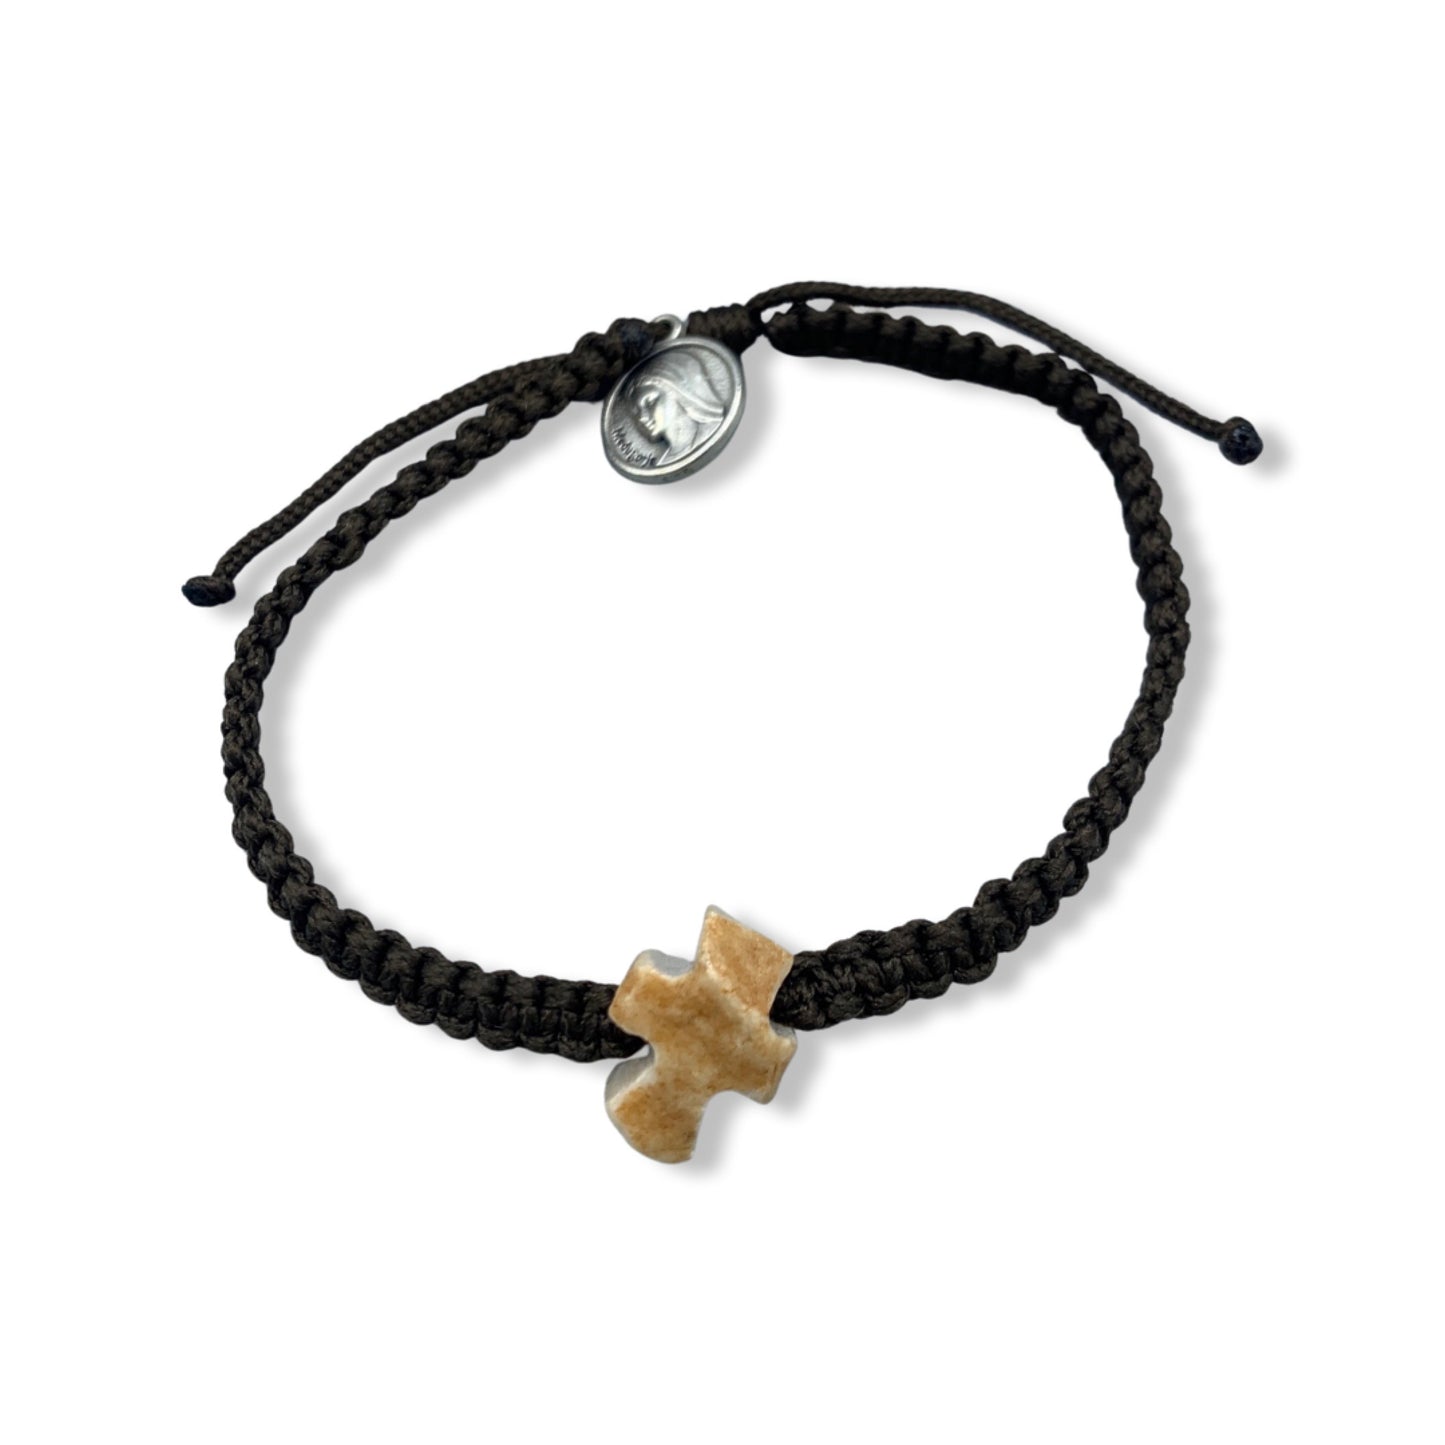 Braided Bracelet of Assorted Colors with Rustic Stone Cross